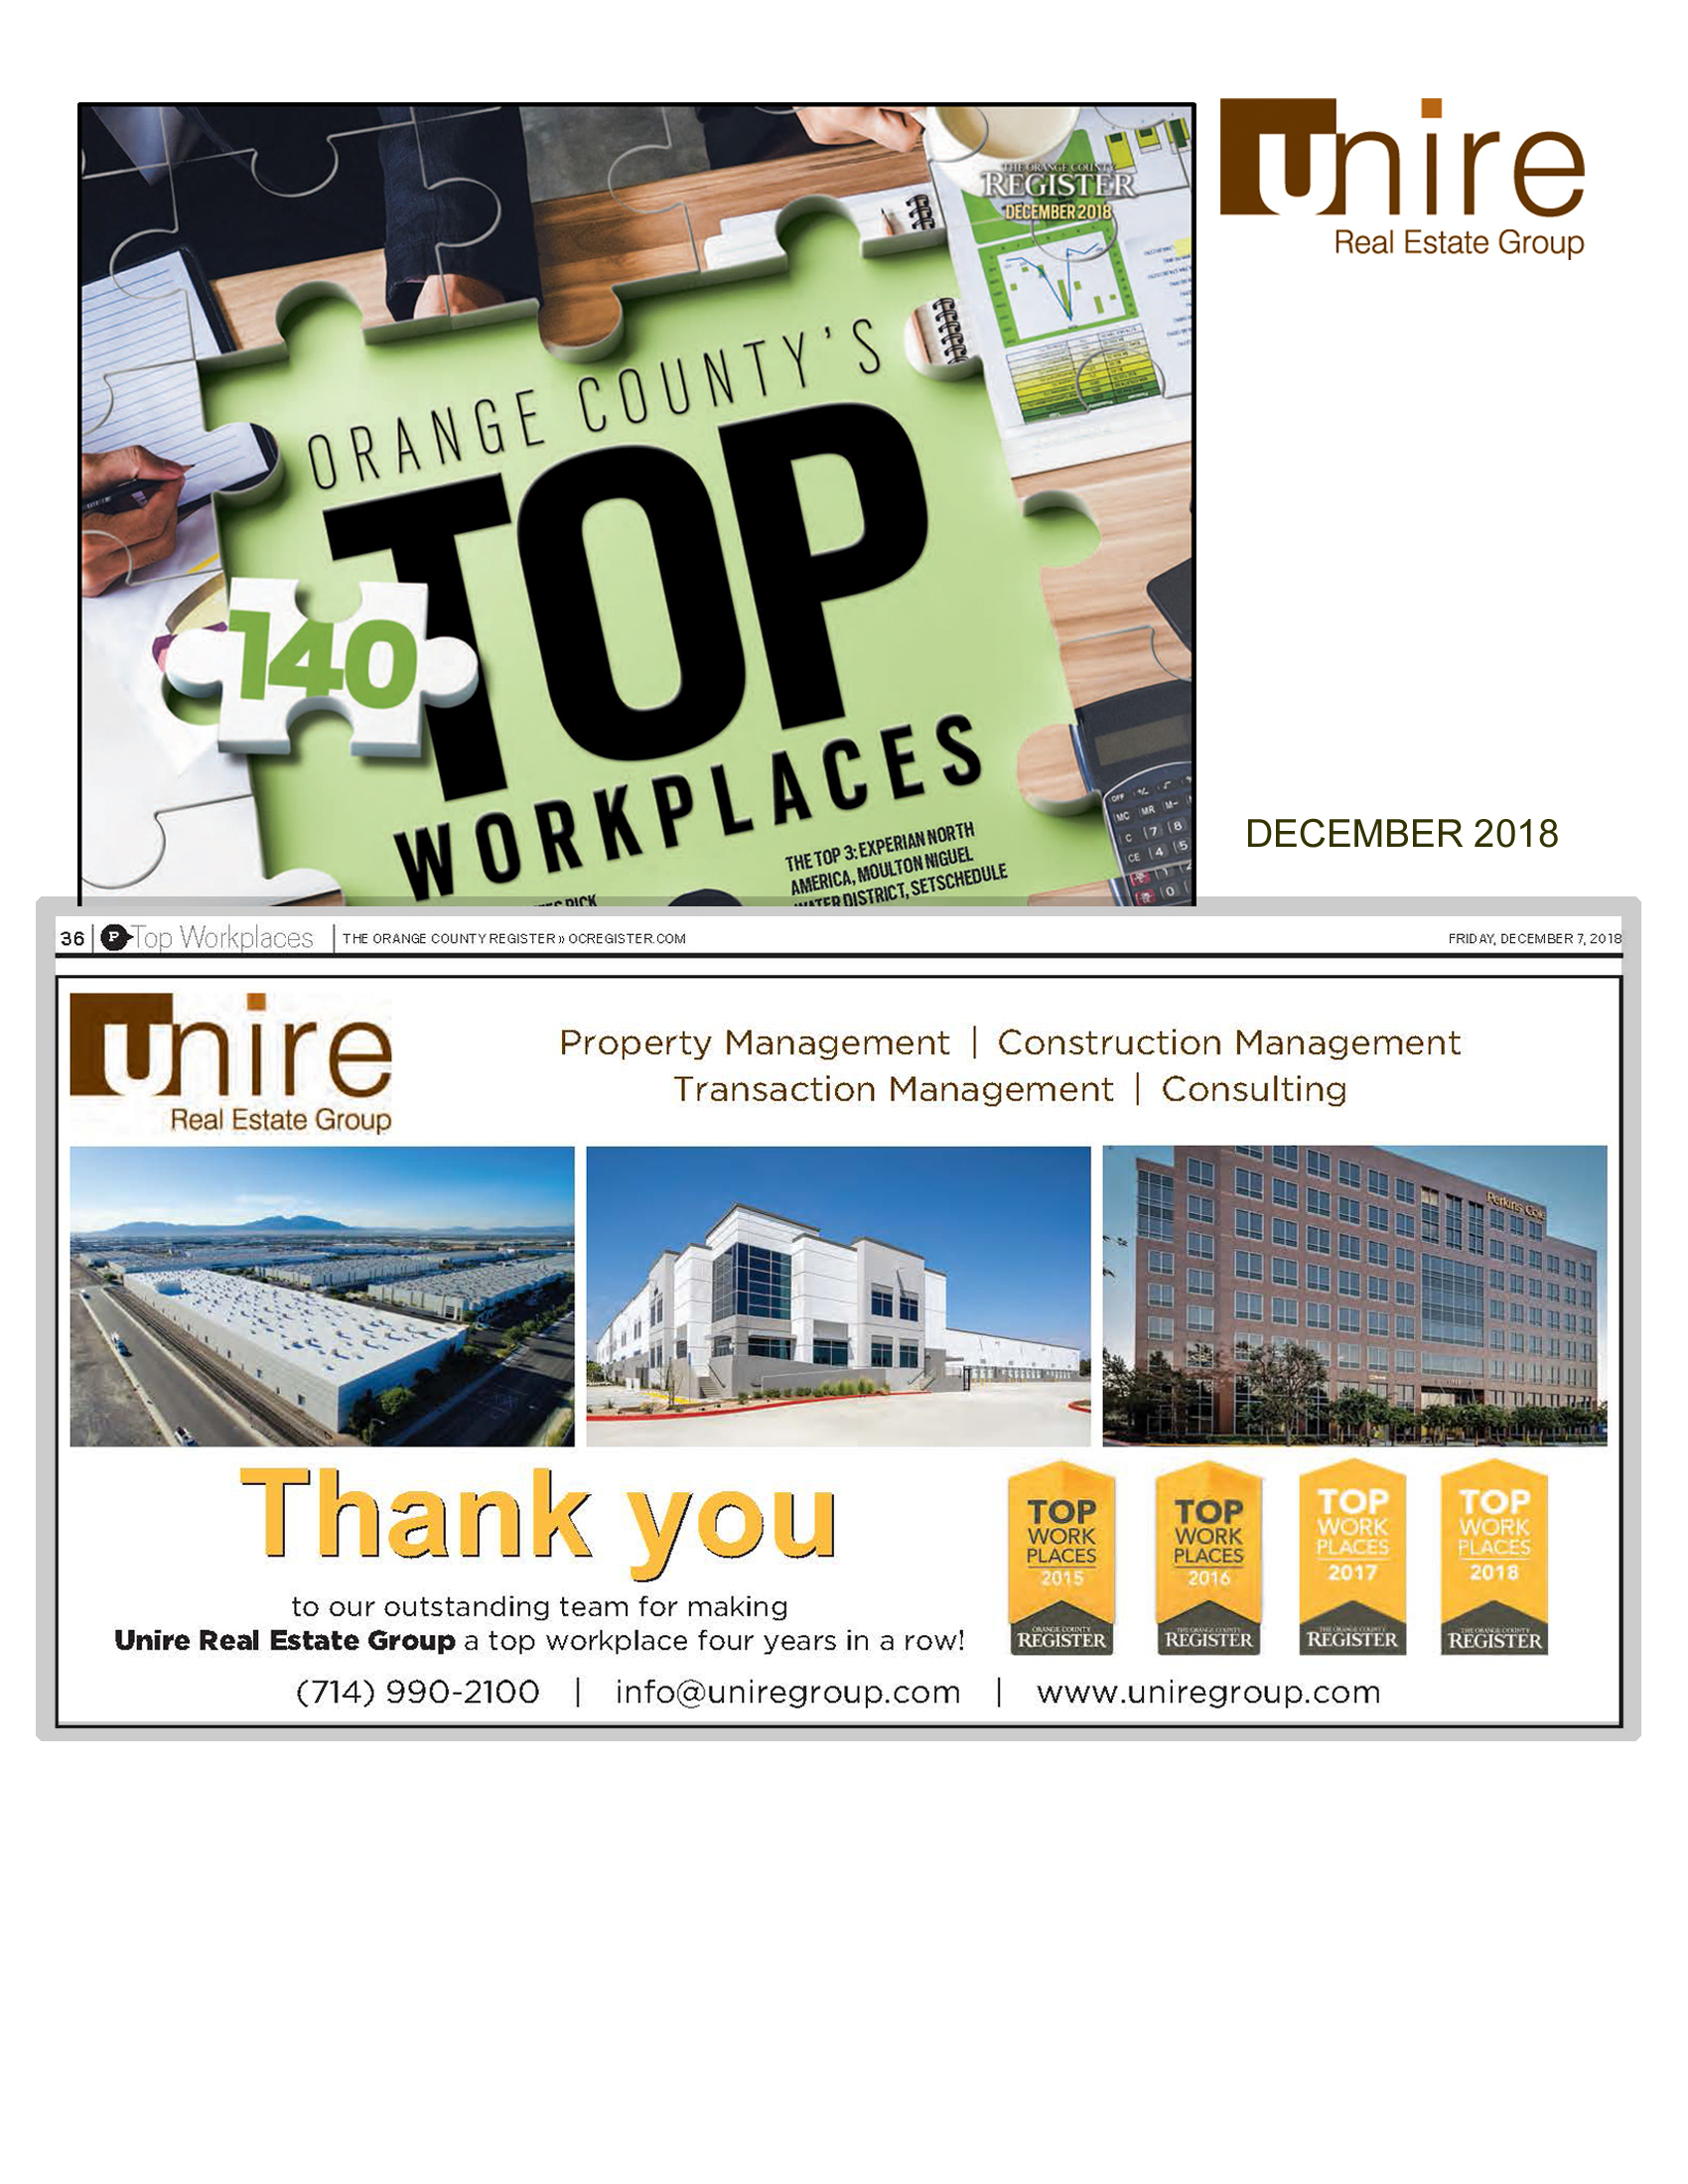 Unire Group Awarded Best Workplaces in Orange County for 4th Year in a row!